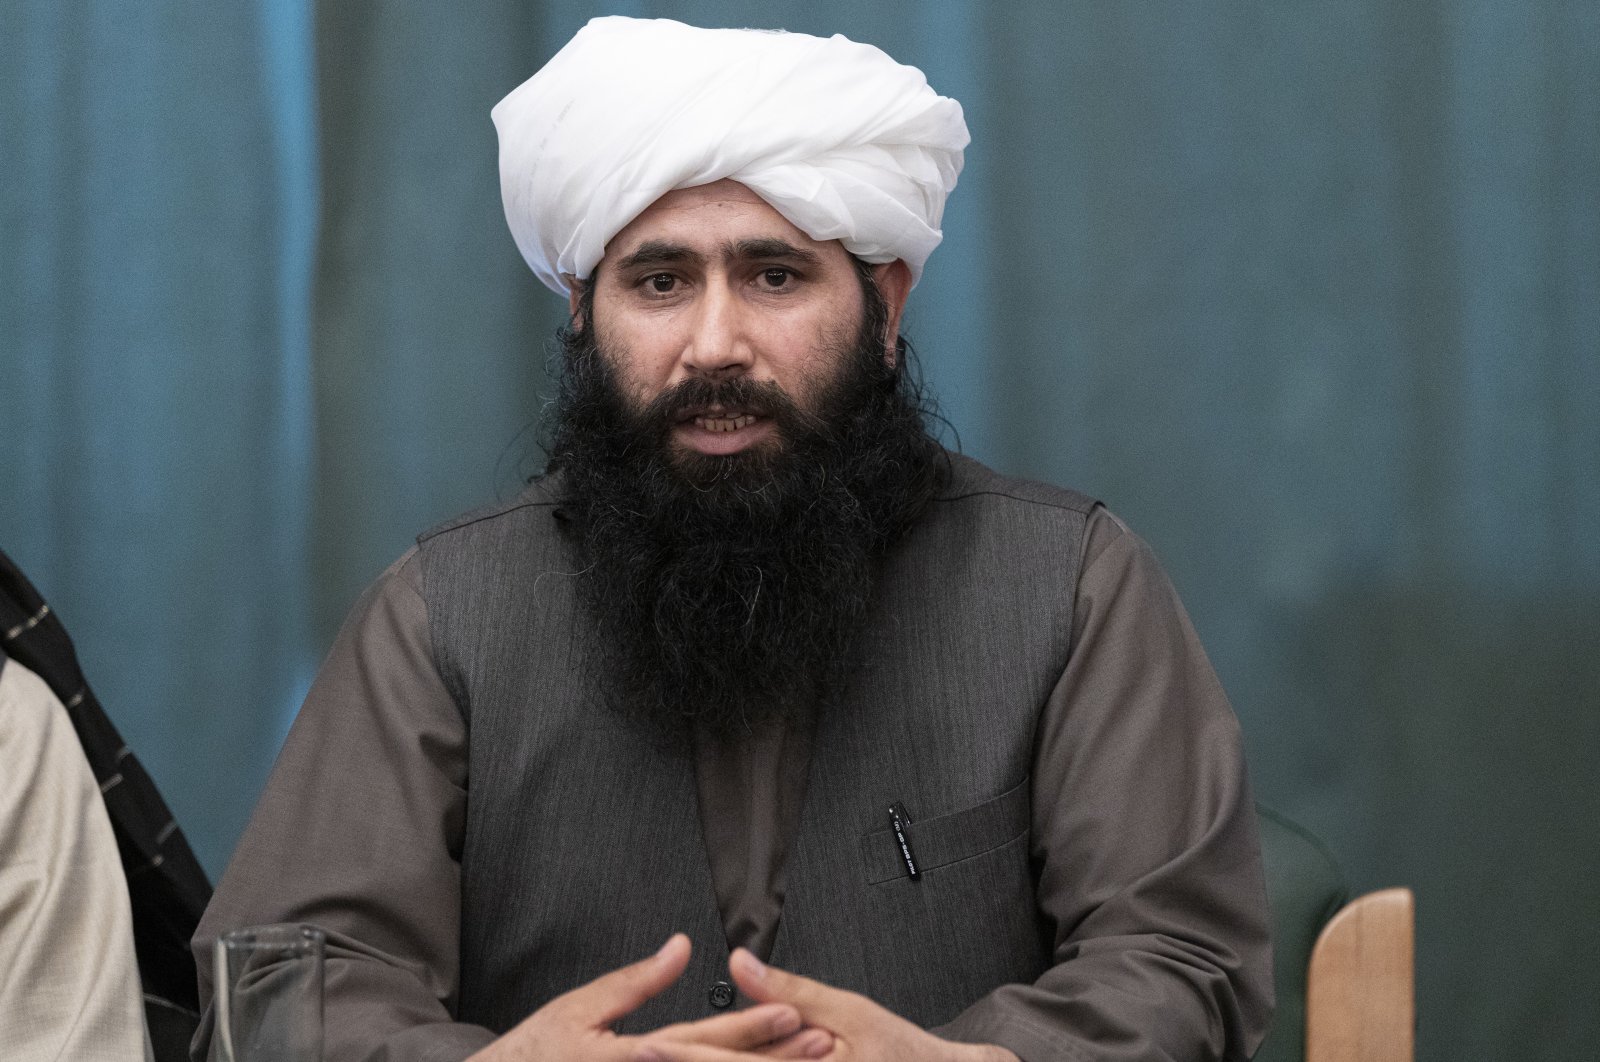 Mohammad Naeem, spokesperson for the Taliban's political office, during a news conference in Moscow, Russia, March 19, 2021. (AP Photo)